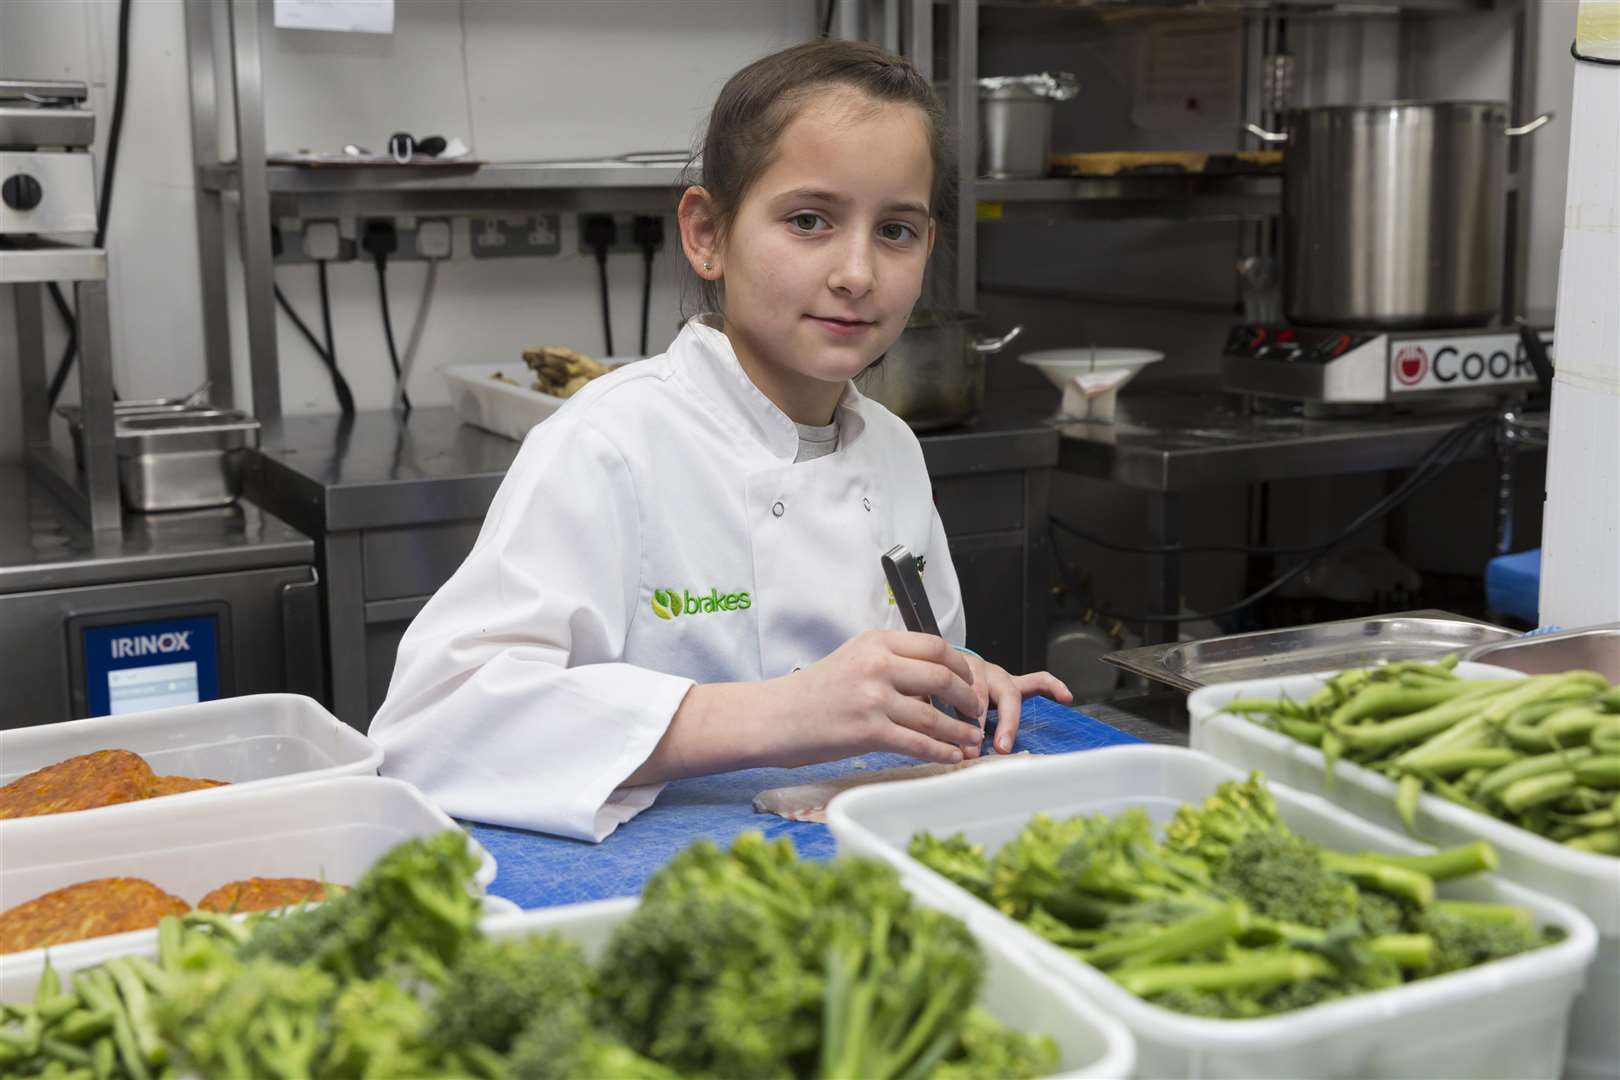 Hard at work preparing the food for the Young Cooks 2018 VIP luncheon: contest champion Boglar of St Nicholas Primary School.